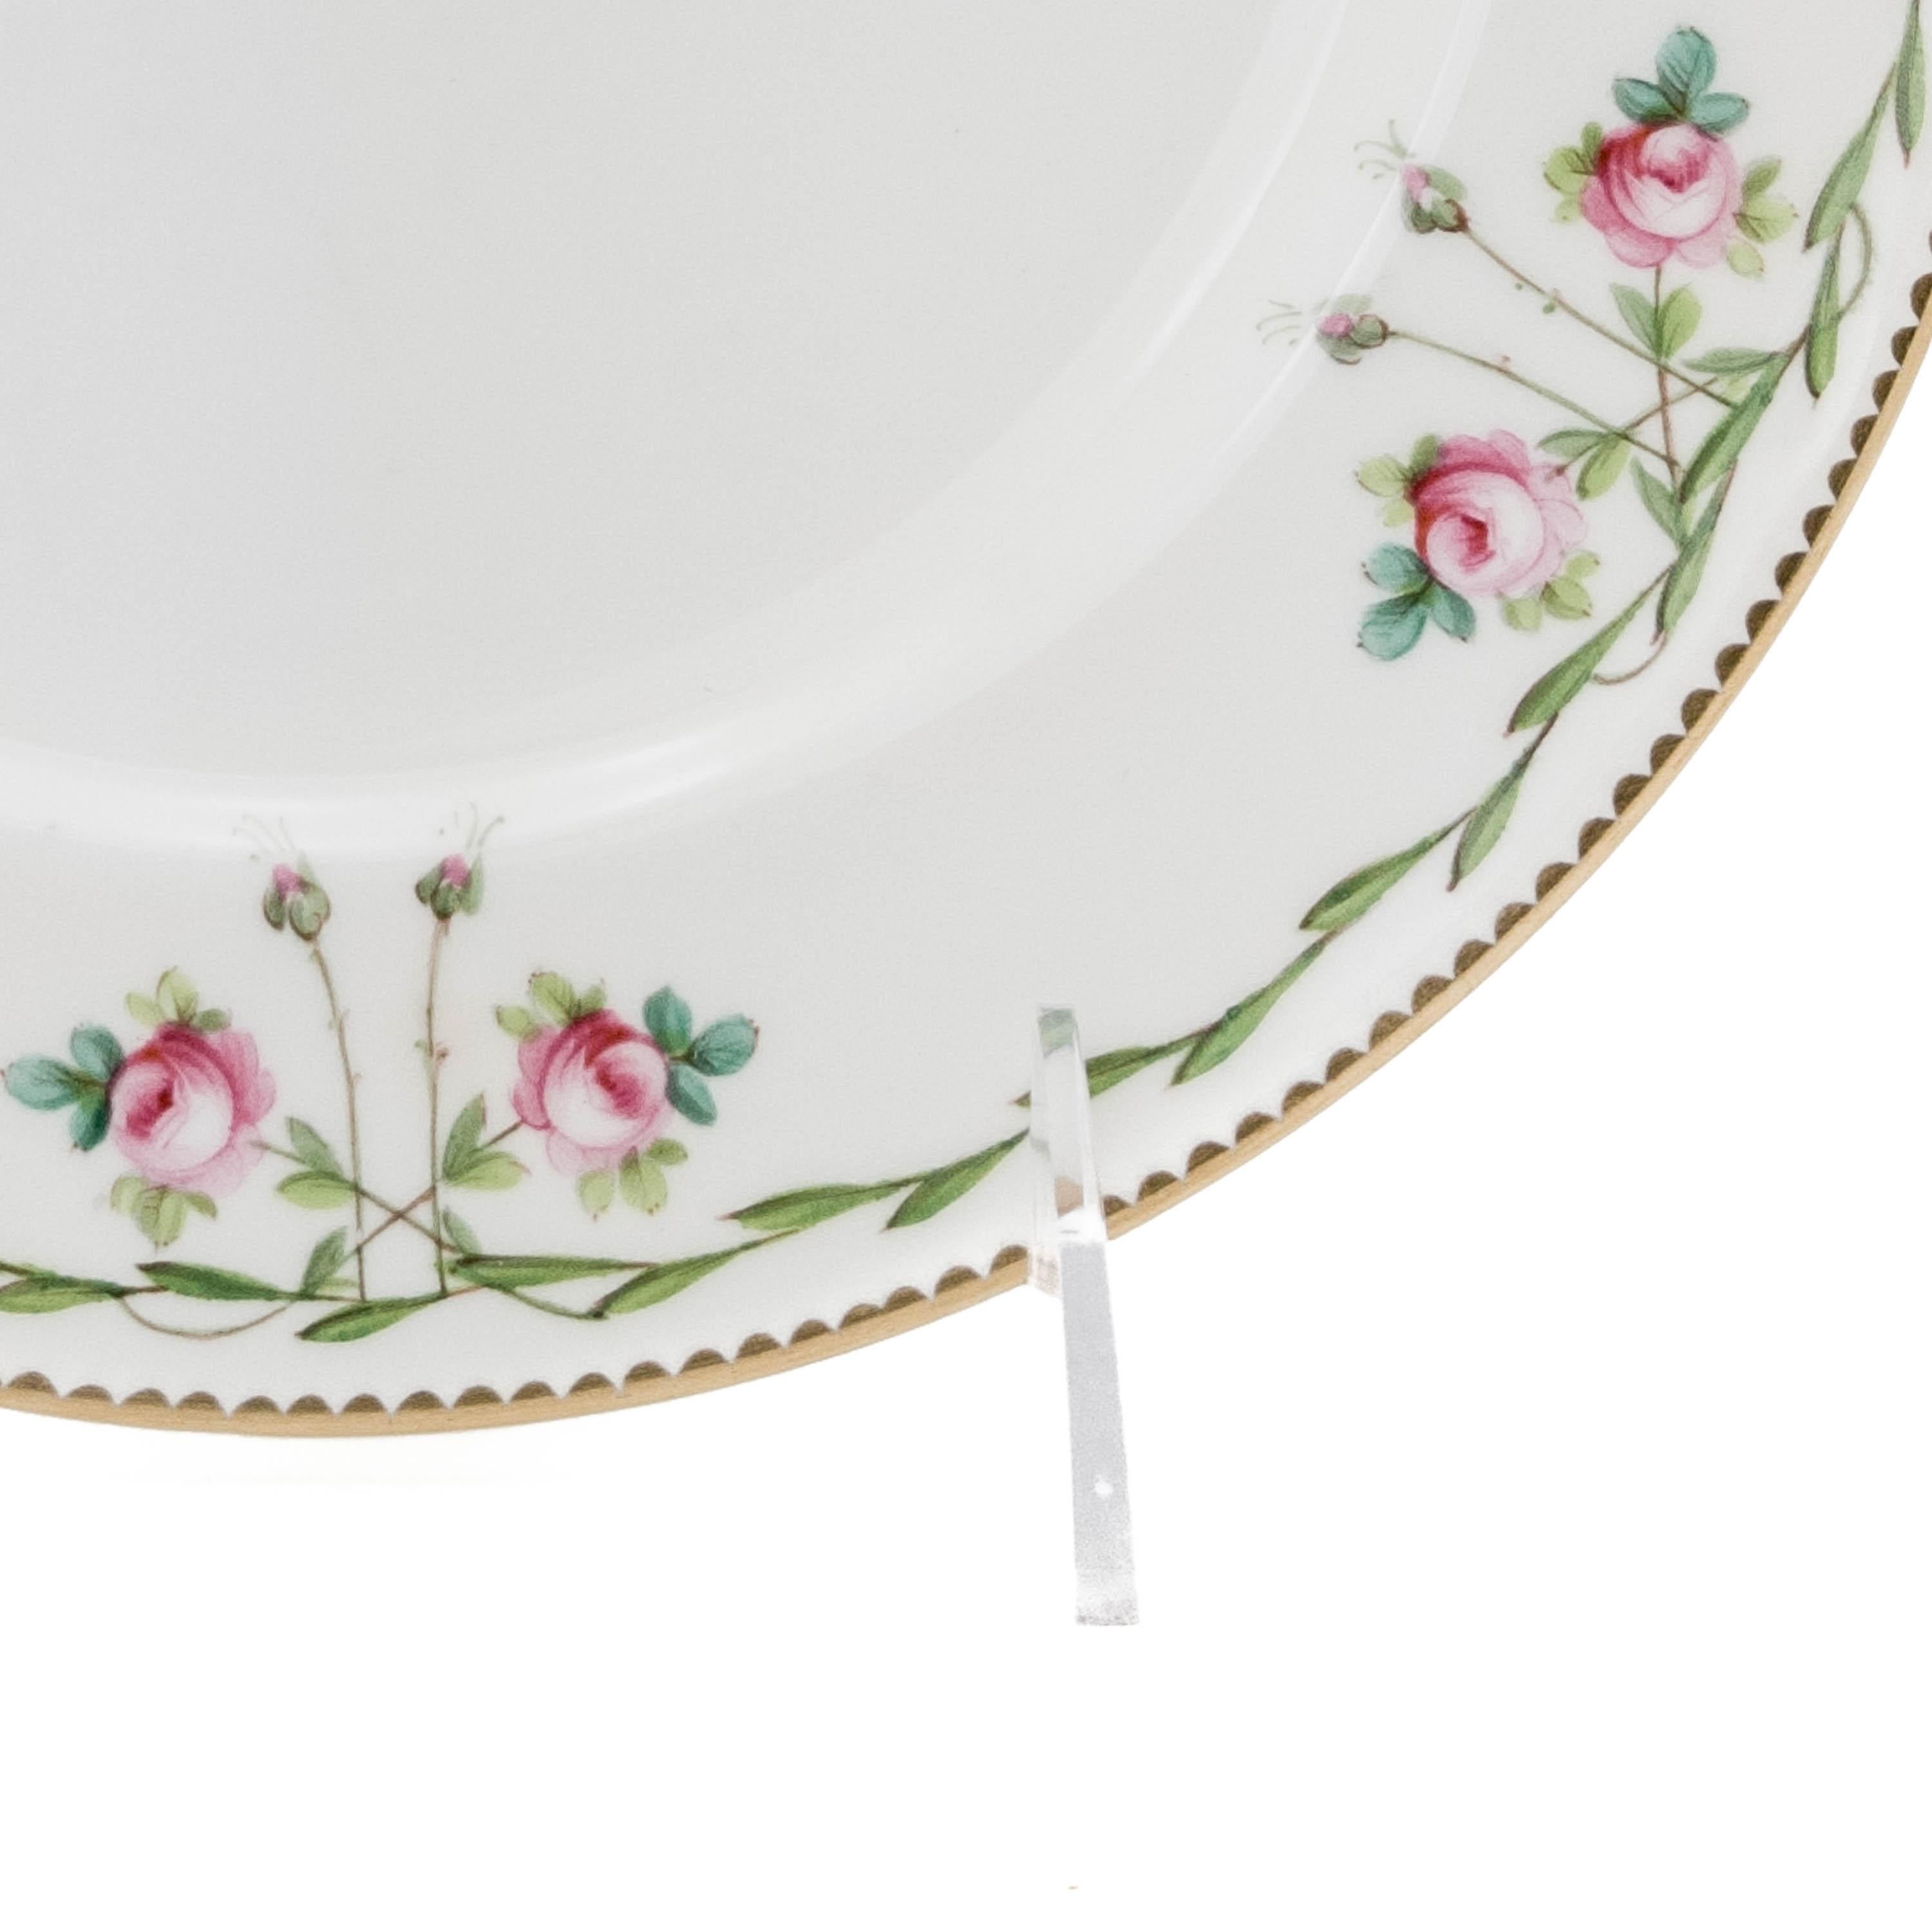 From Minton's of England a Classic design trimmed in 24-karat gold. Hints of turquoise green in the hand painted leaves with pretty rose surround on the collars. In nice antique condition with no chips or damage. Fully hall marked and dating to the